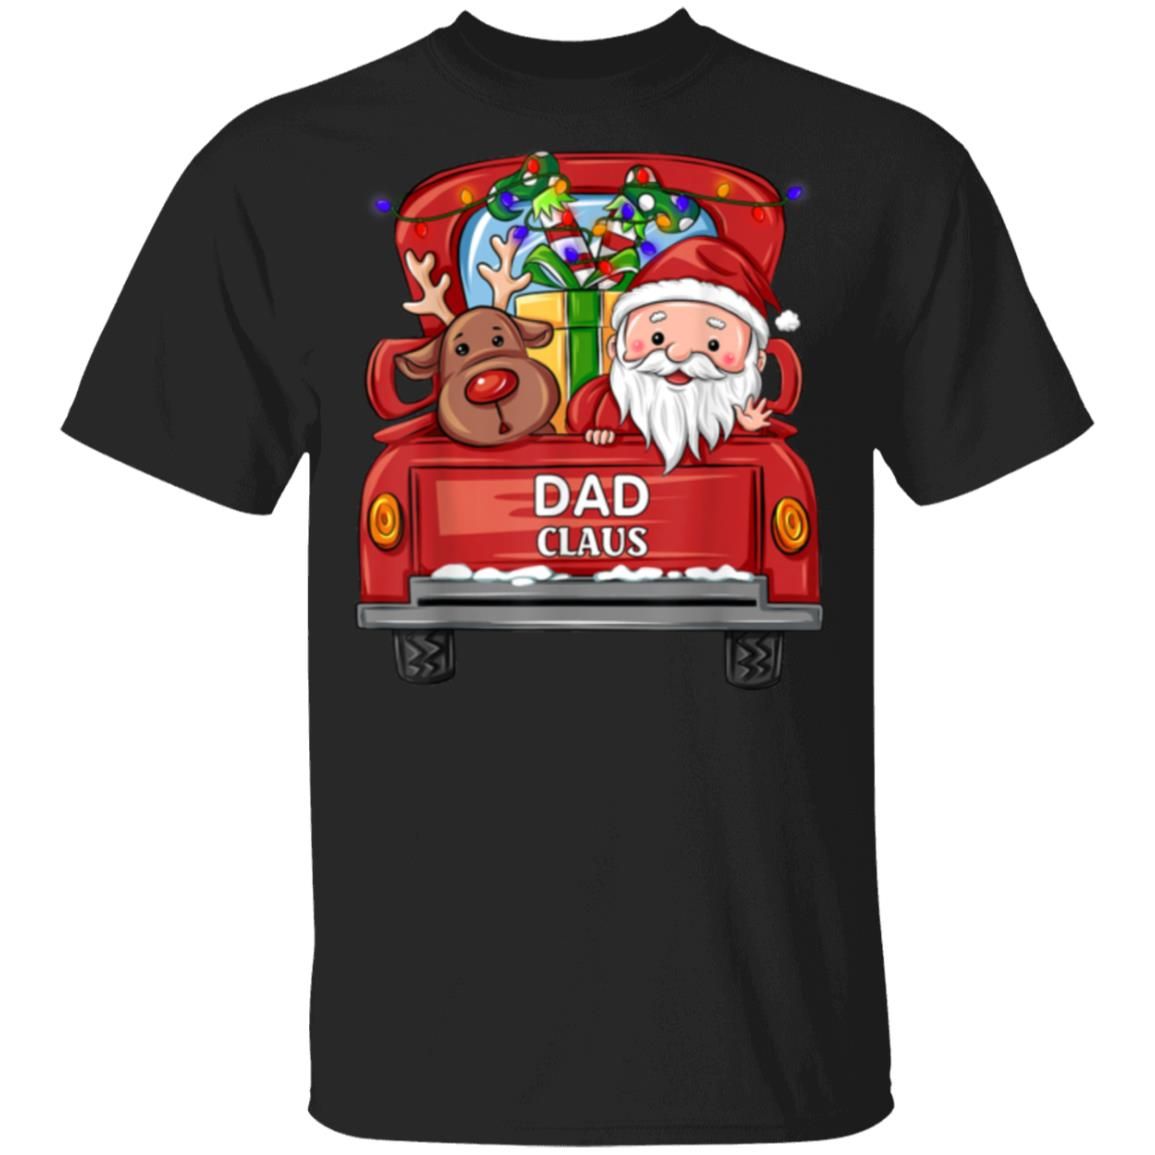 Dad Claus Reindeer Truck Rides Christmas Funny Gift Christmas Shirt Style: Unisex T-shirt, Color: Black